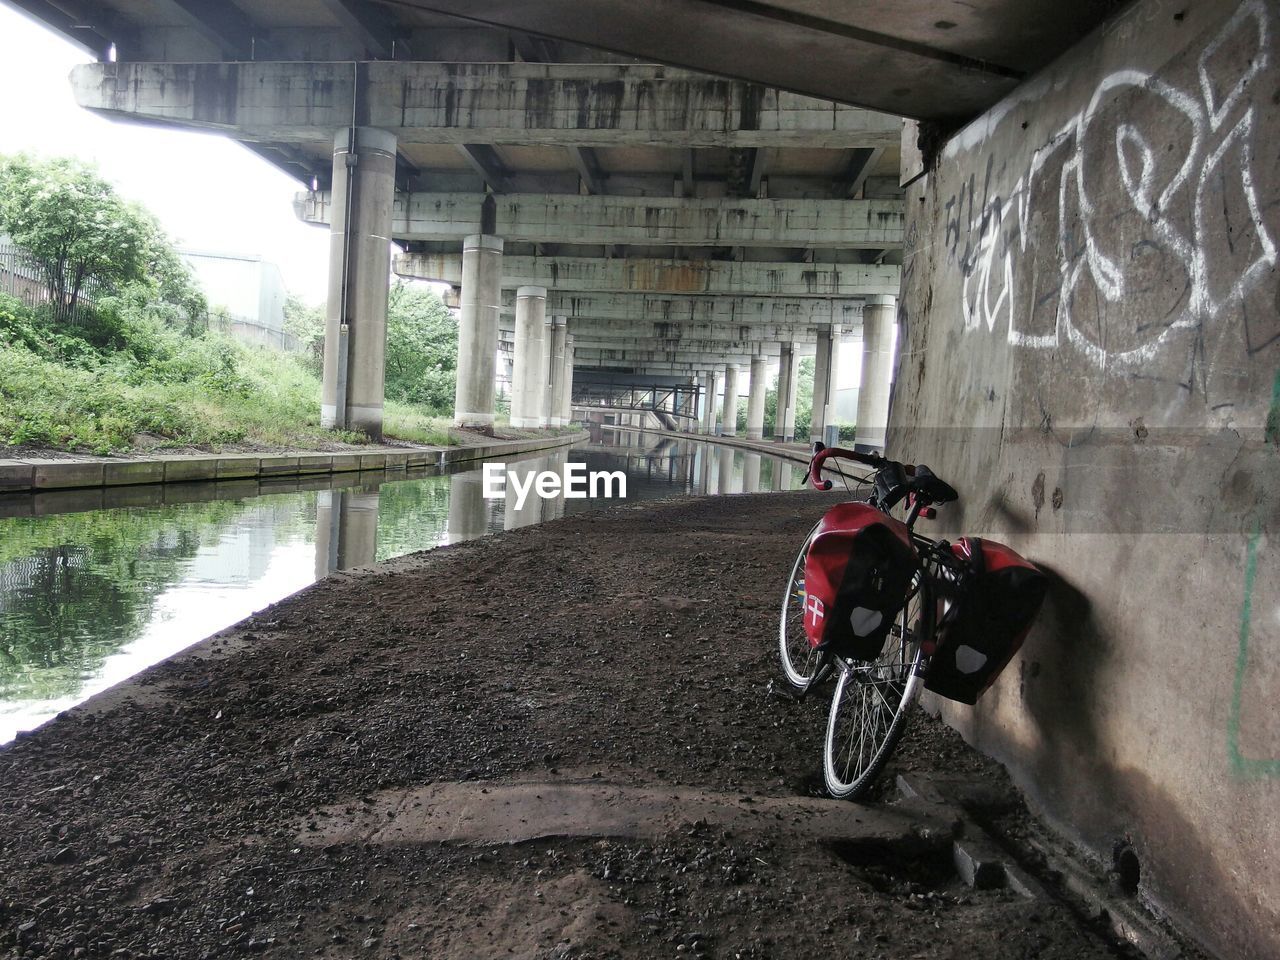 A bicycle stands against a cement wall below a bridge next to a small river